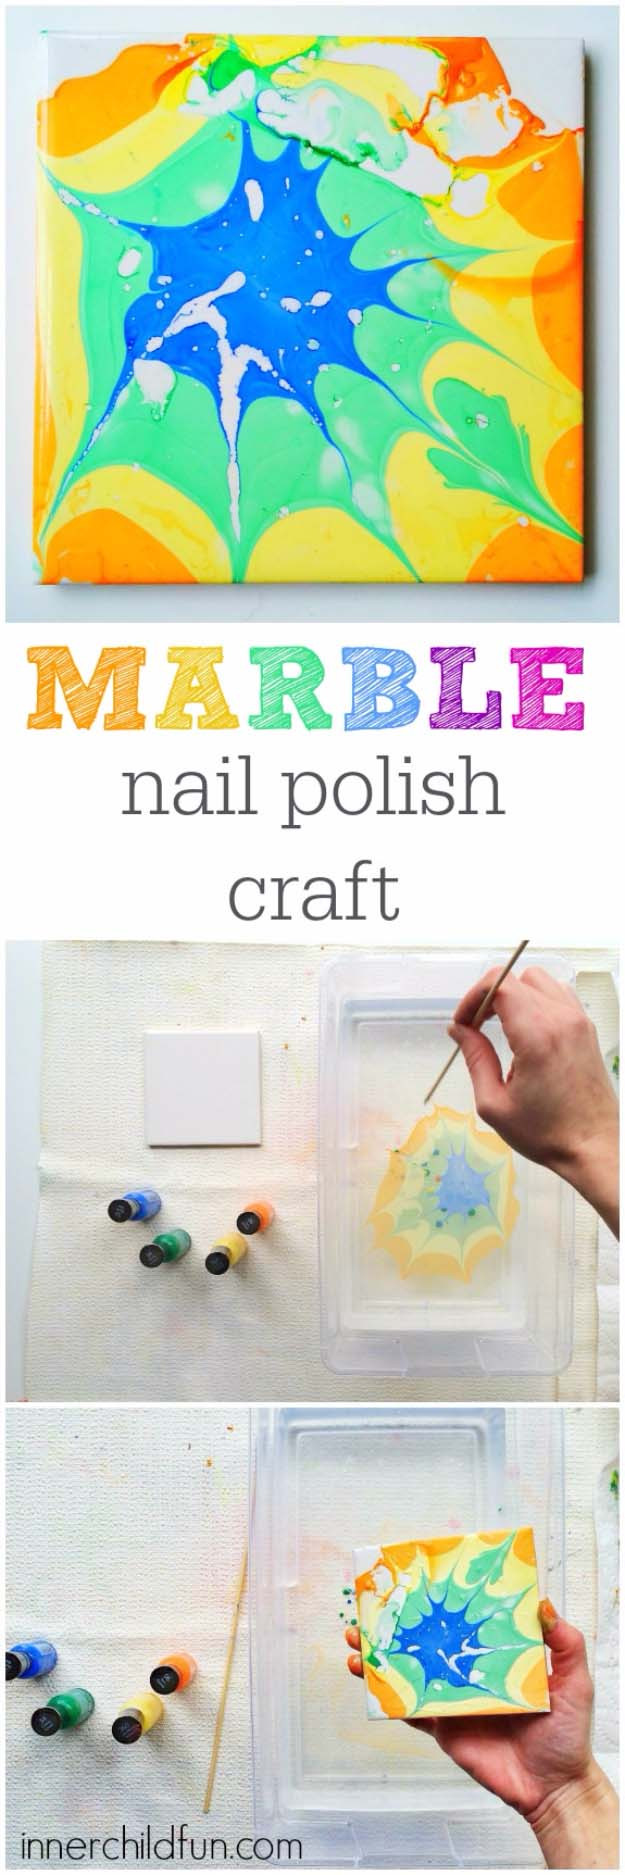 Craft Ideas For Adults Step By Step
 31 Incredibly Cool DIY Crafts Using Nail Polish